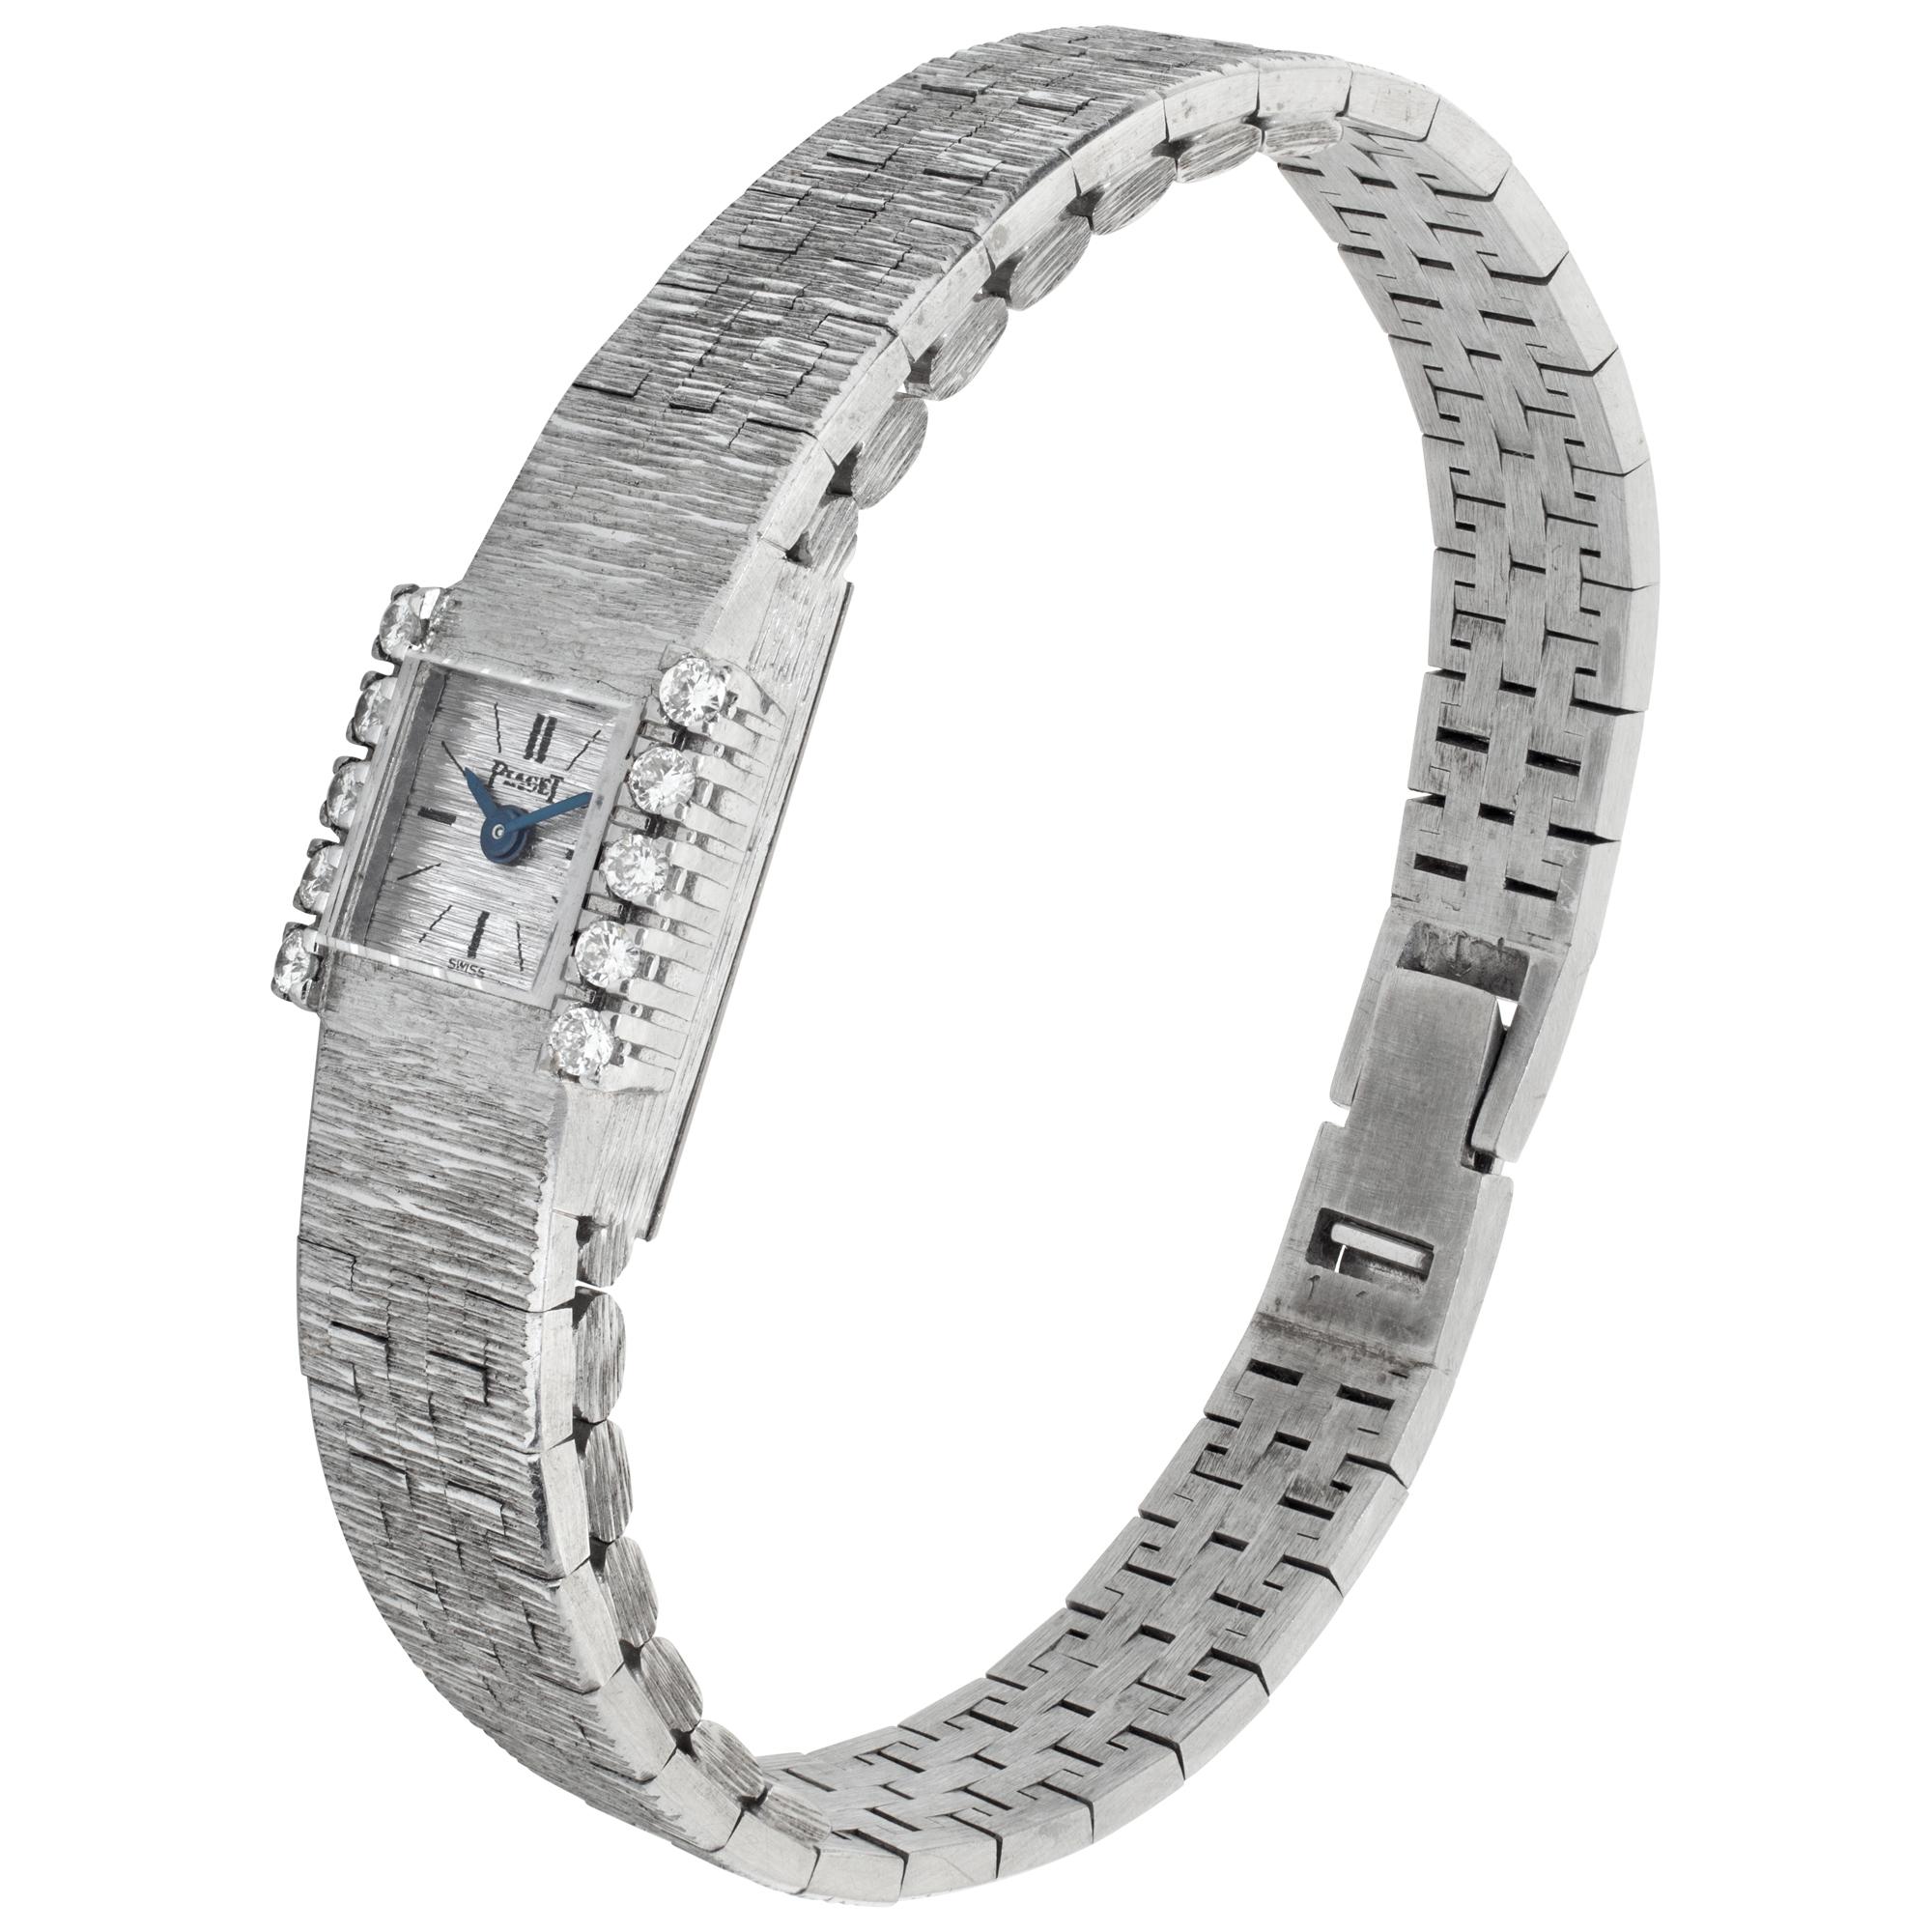 Piaget Ladies Classique cocktail watch in 18k white gold with diamond bezel and 6 inch 18k white gold bracelet. Manual. 10 mm case size. Ref 1018 AG. Fine Pre-owned Piaget Watch.

 Certified preowned Classic Piaget Classic 1018 AG watch is made out